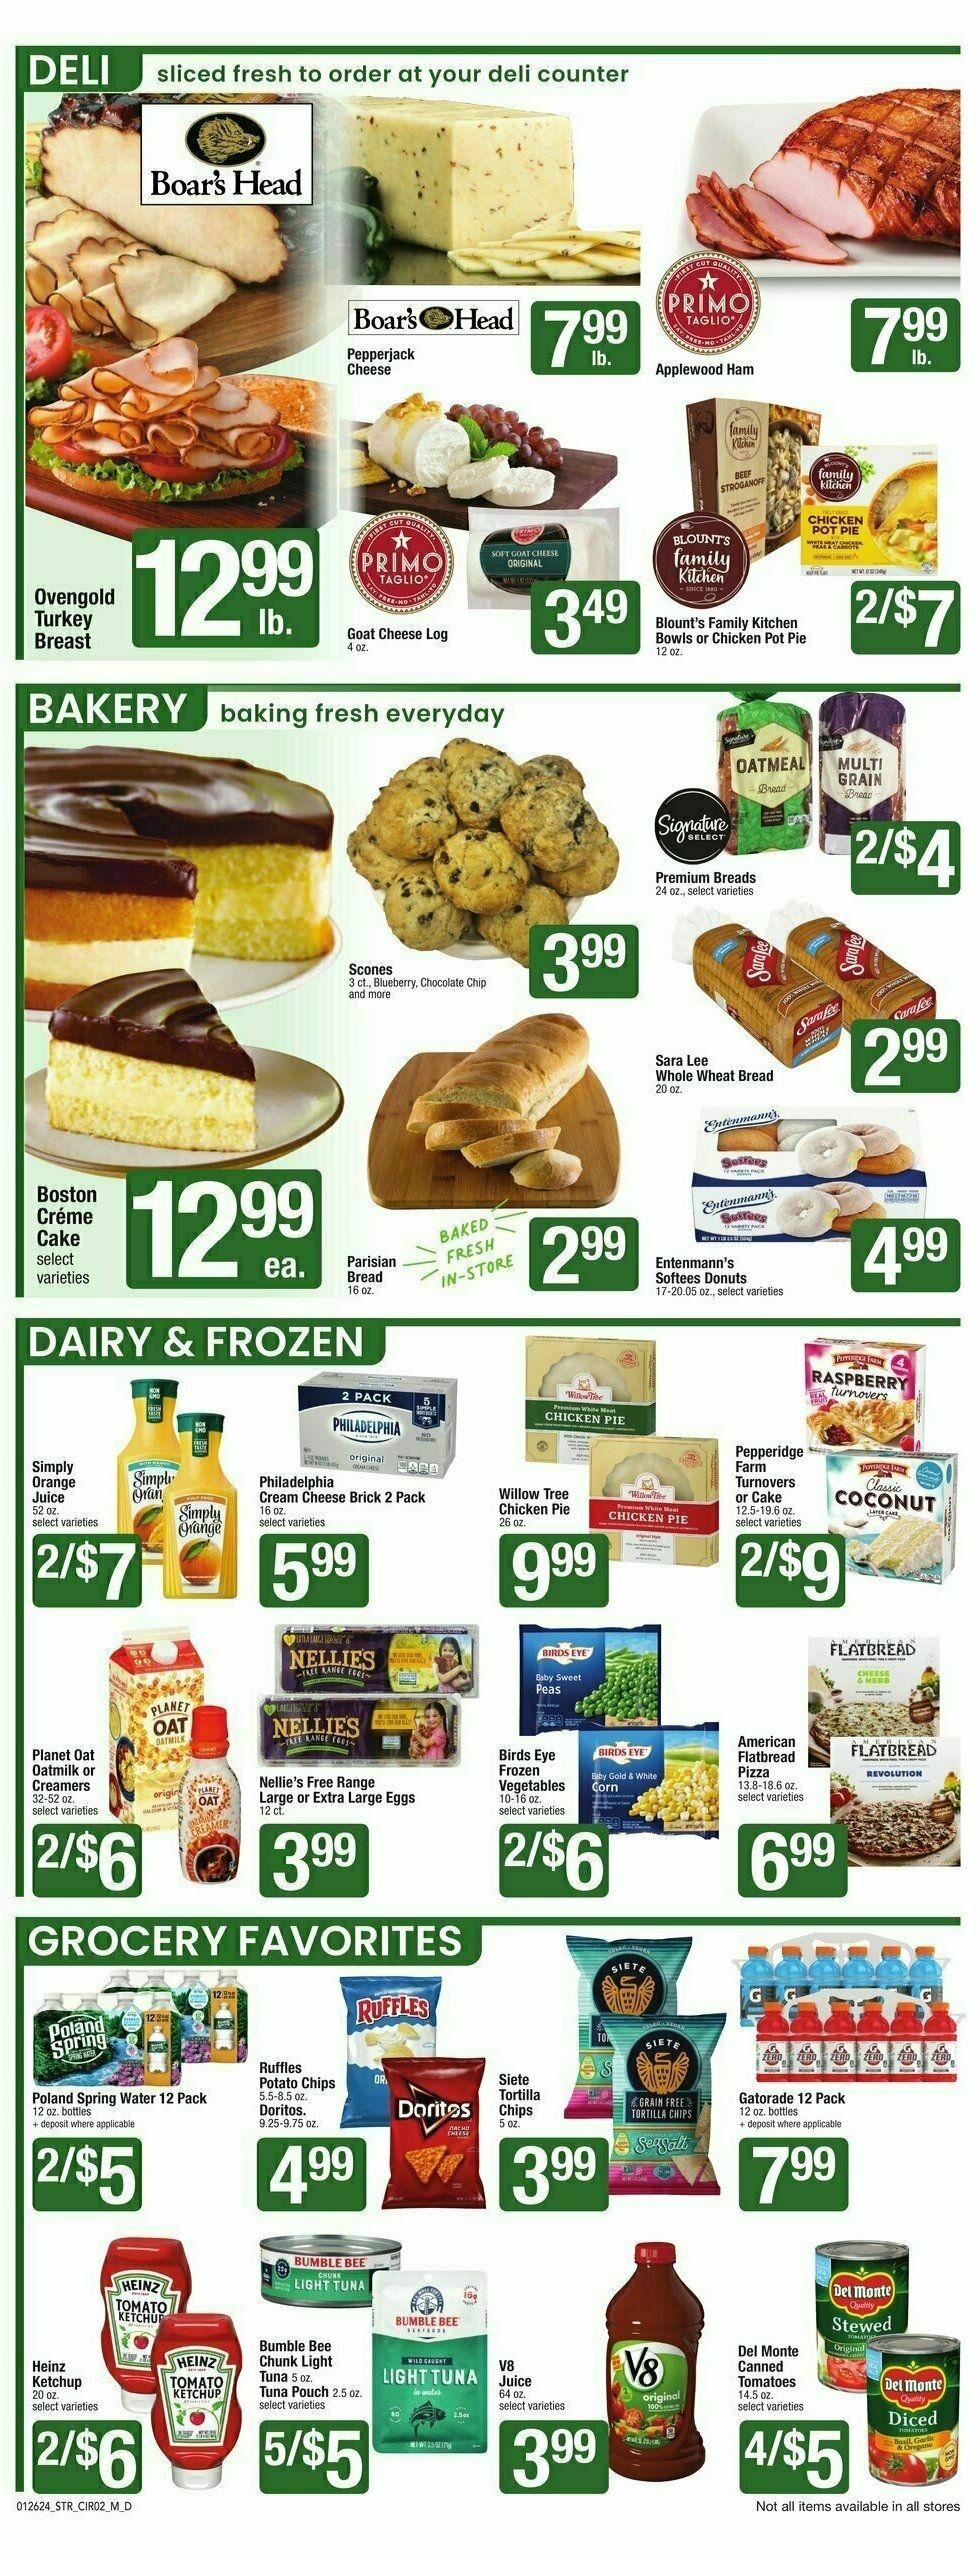 Star Market Weekly Ad from January 26